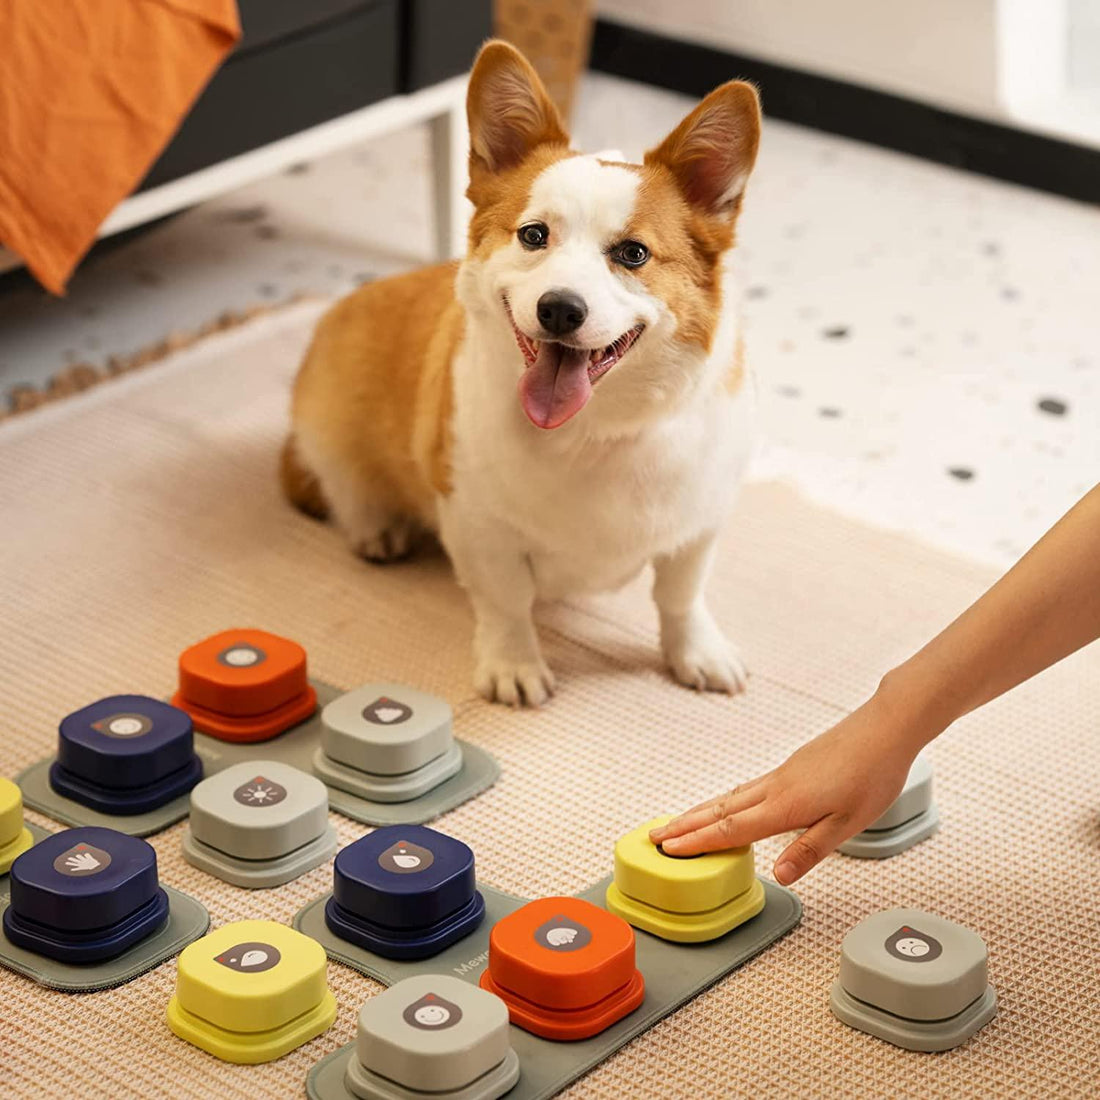 Teaching Your Dog to Talk: A Guide to Using Buttons for Communication